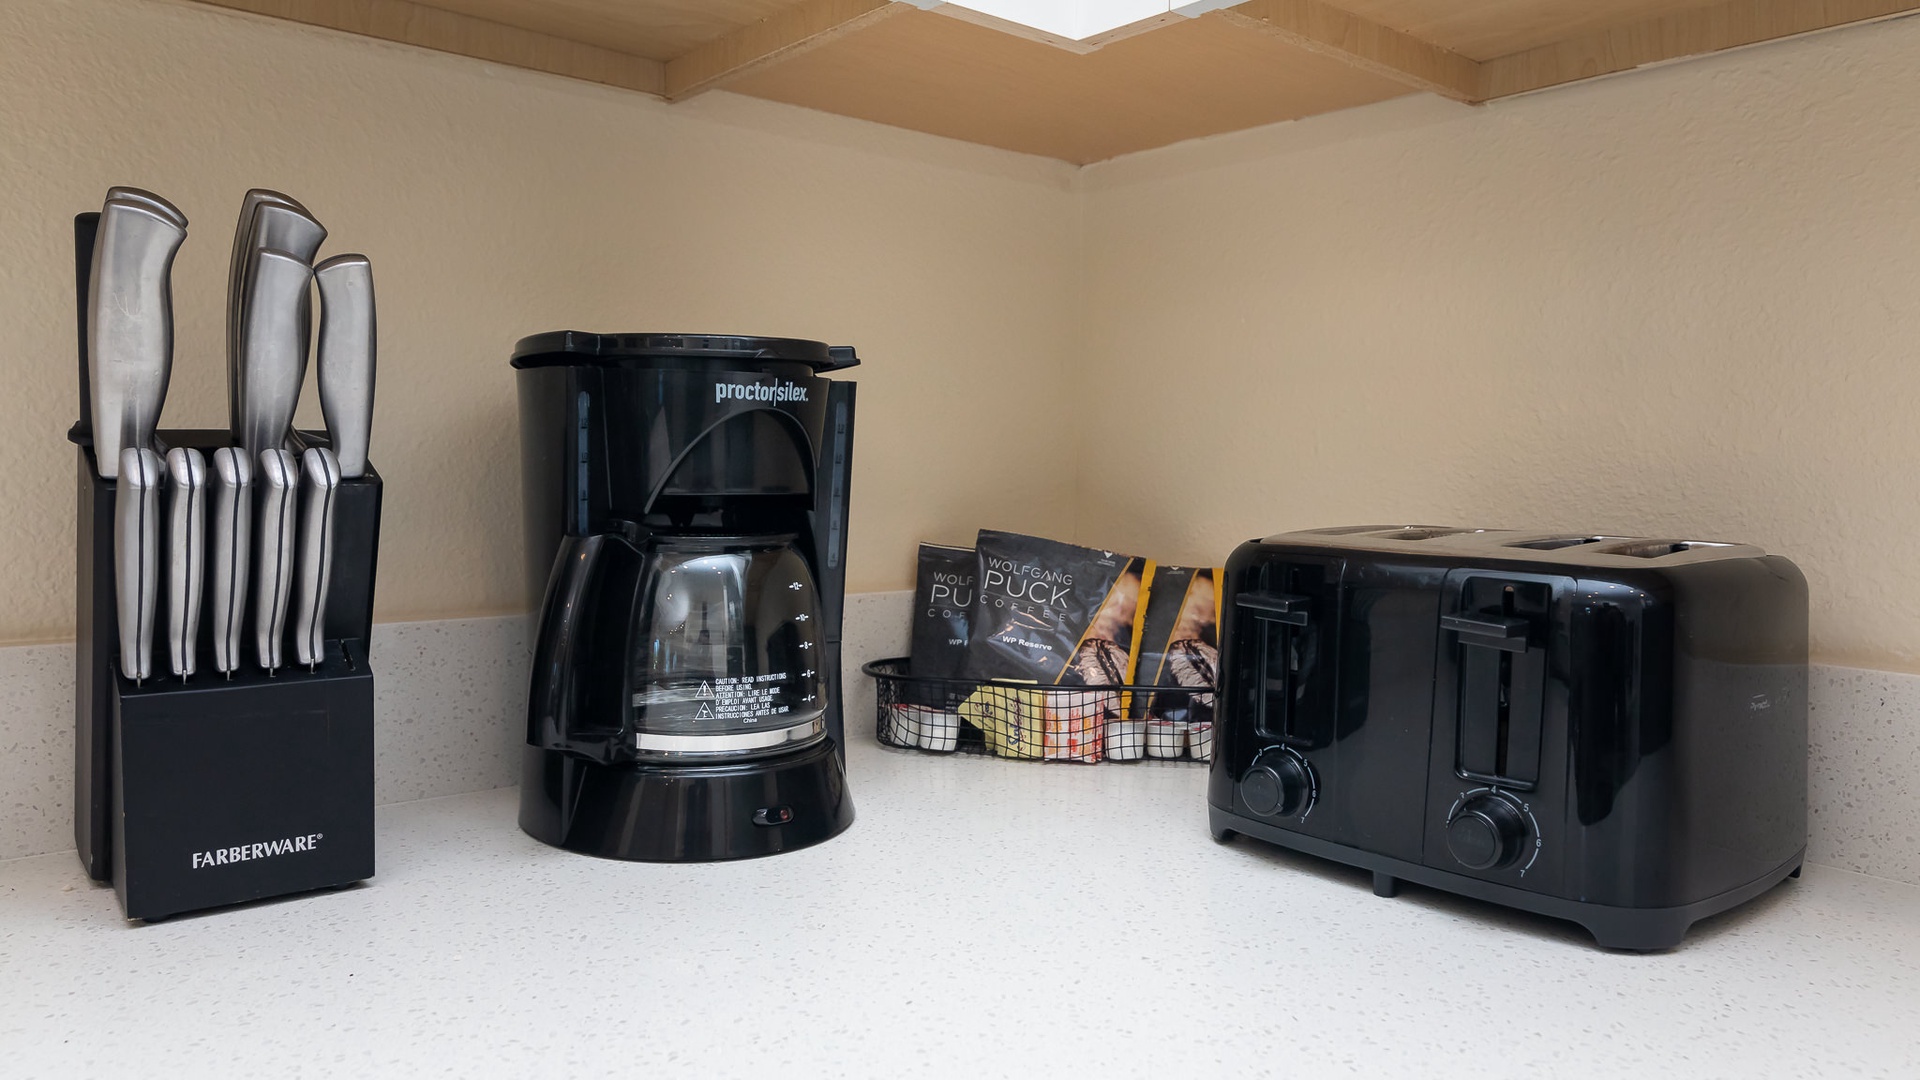 Coffee maker and bread toaster